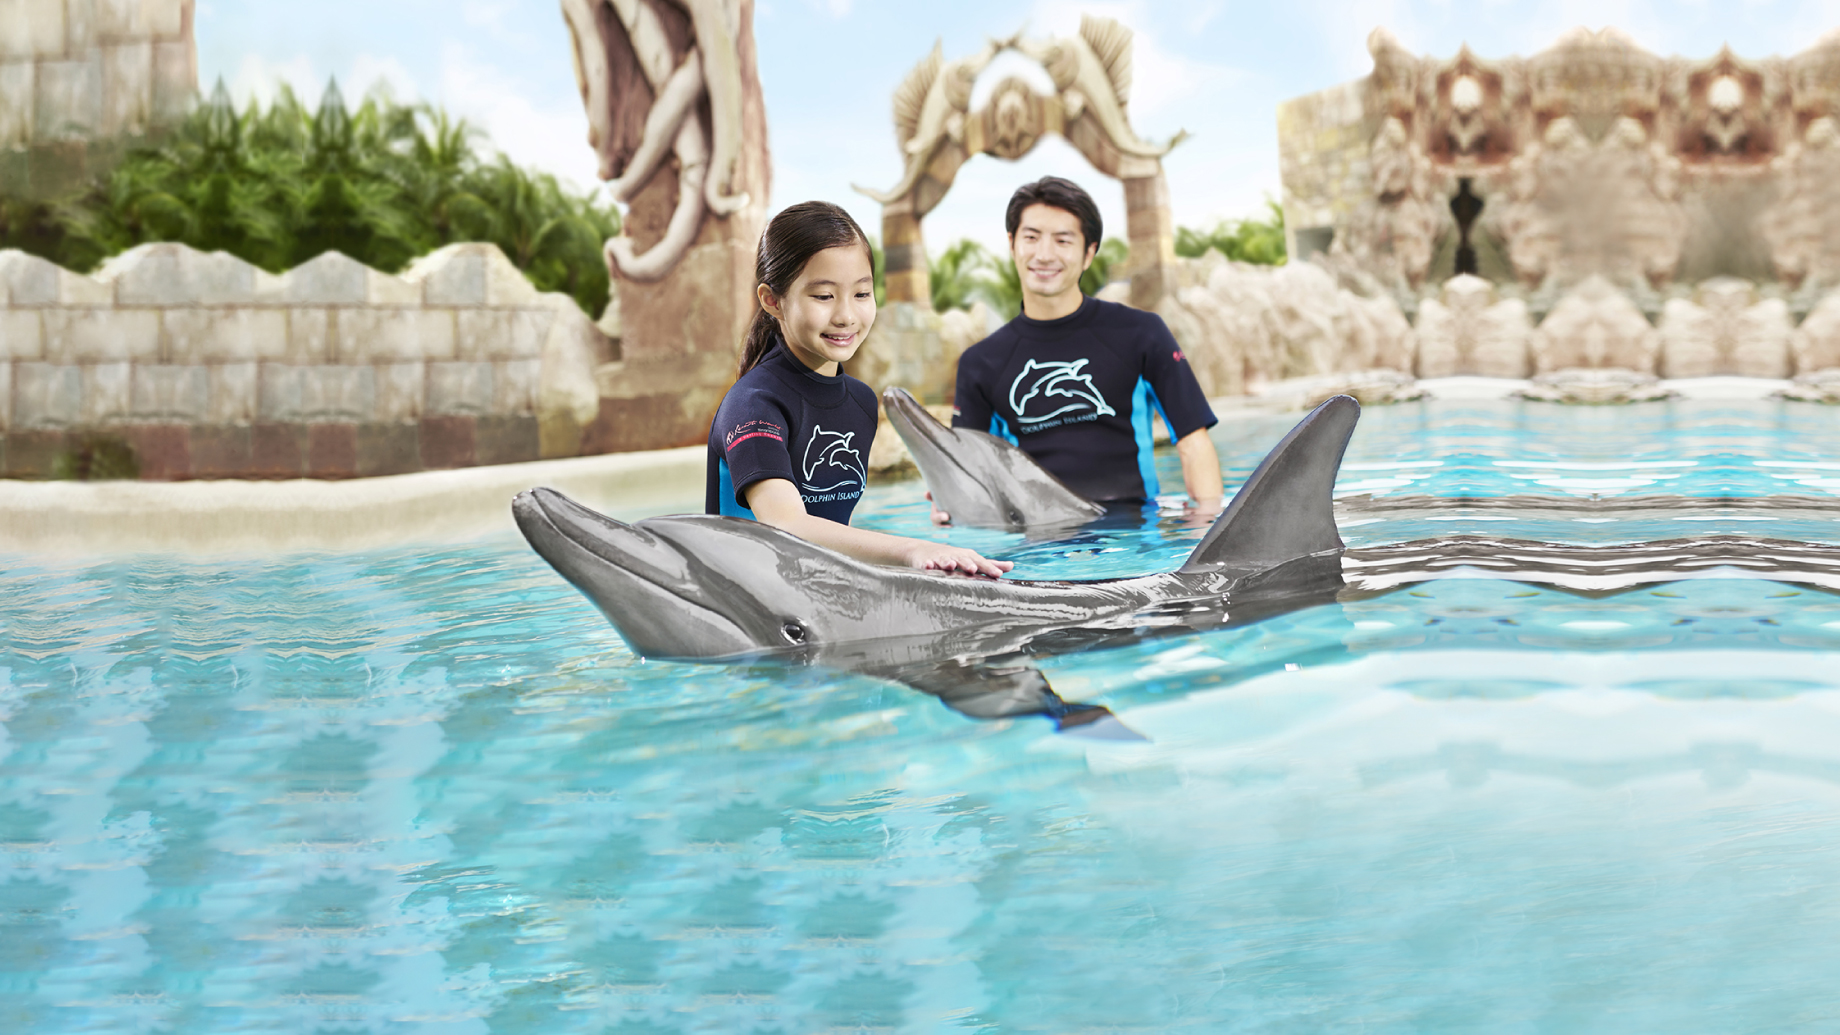 A young girl coming face-to-face with a gentle and playful bottlenose dolphin